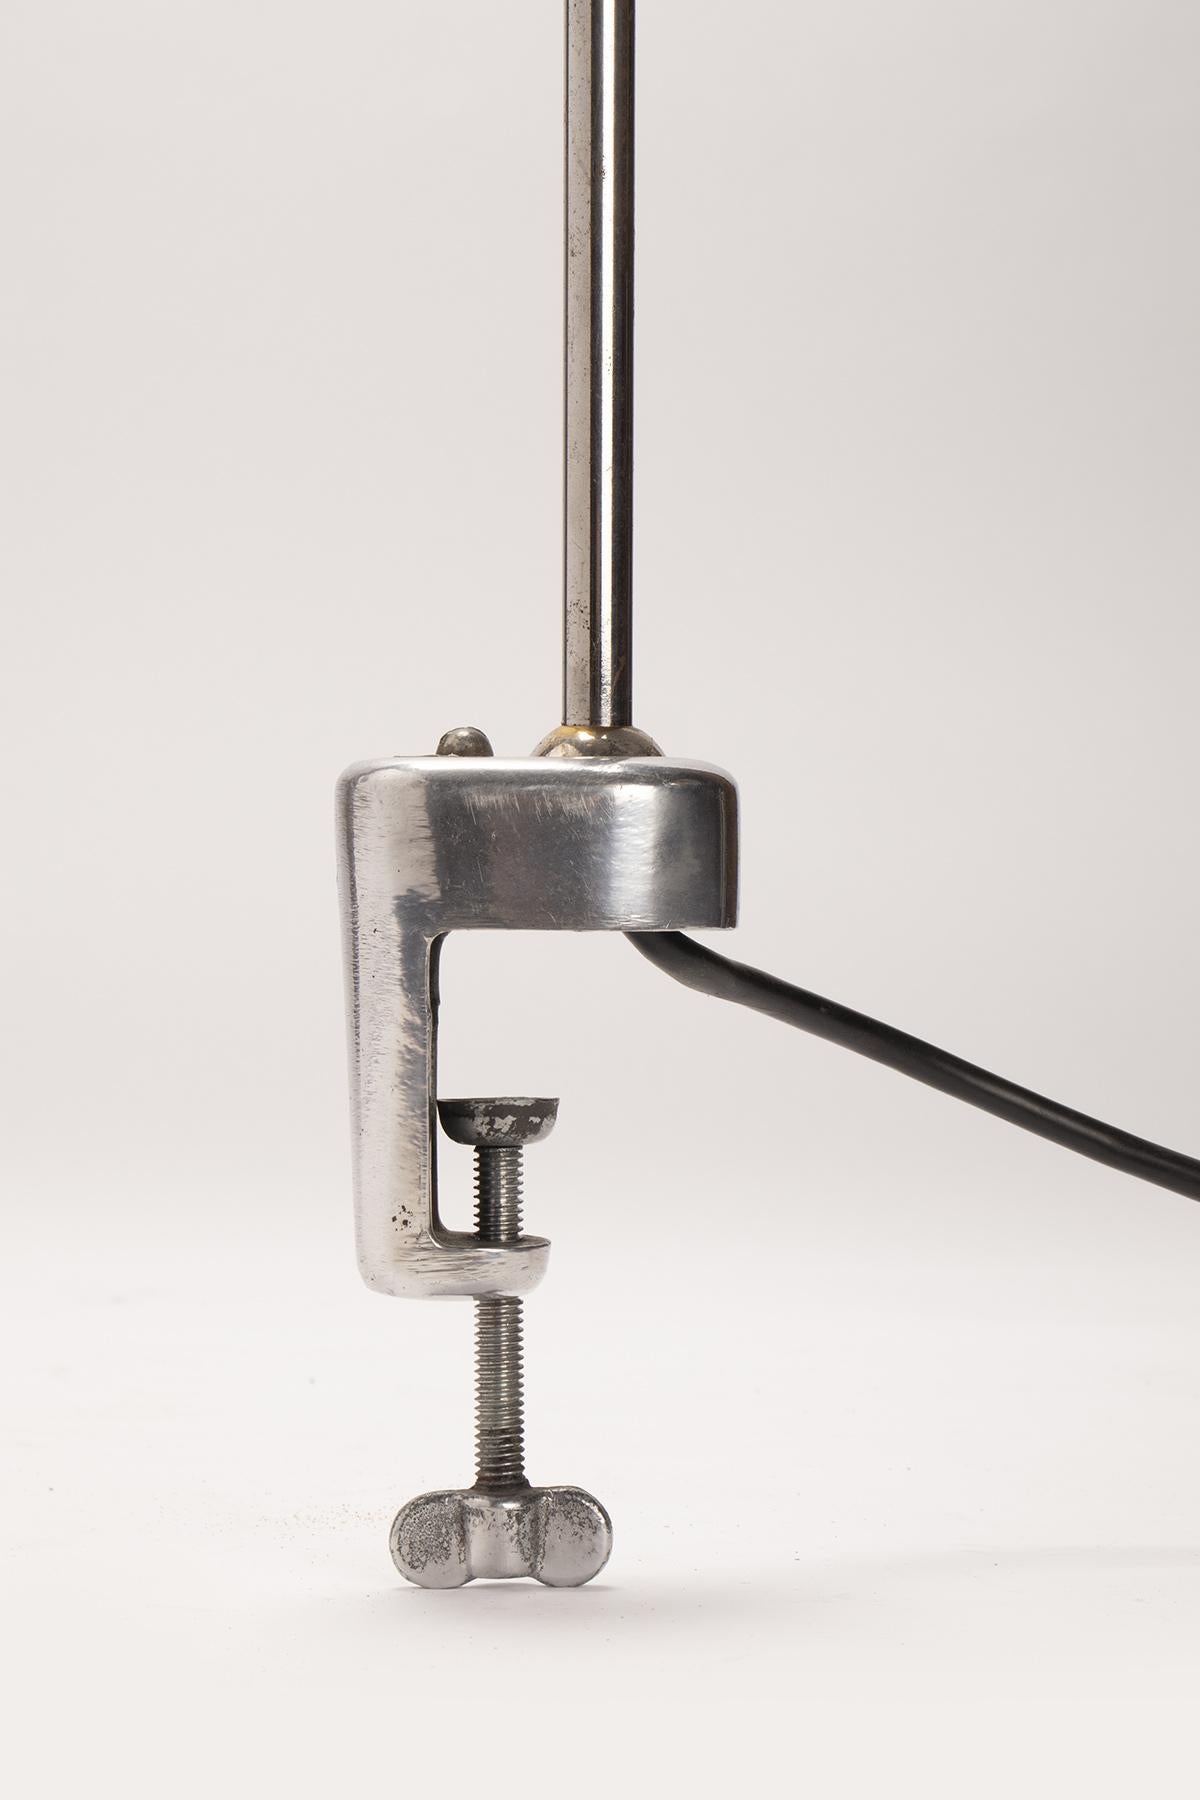 Aluminum Adjustable Table Lamp with Clamp, France, 1930 For Sale